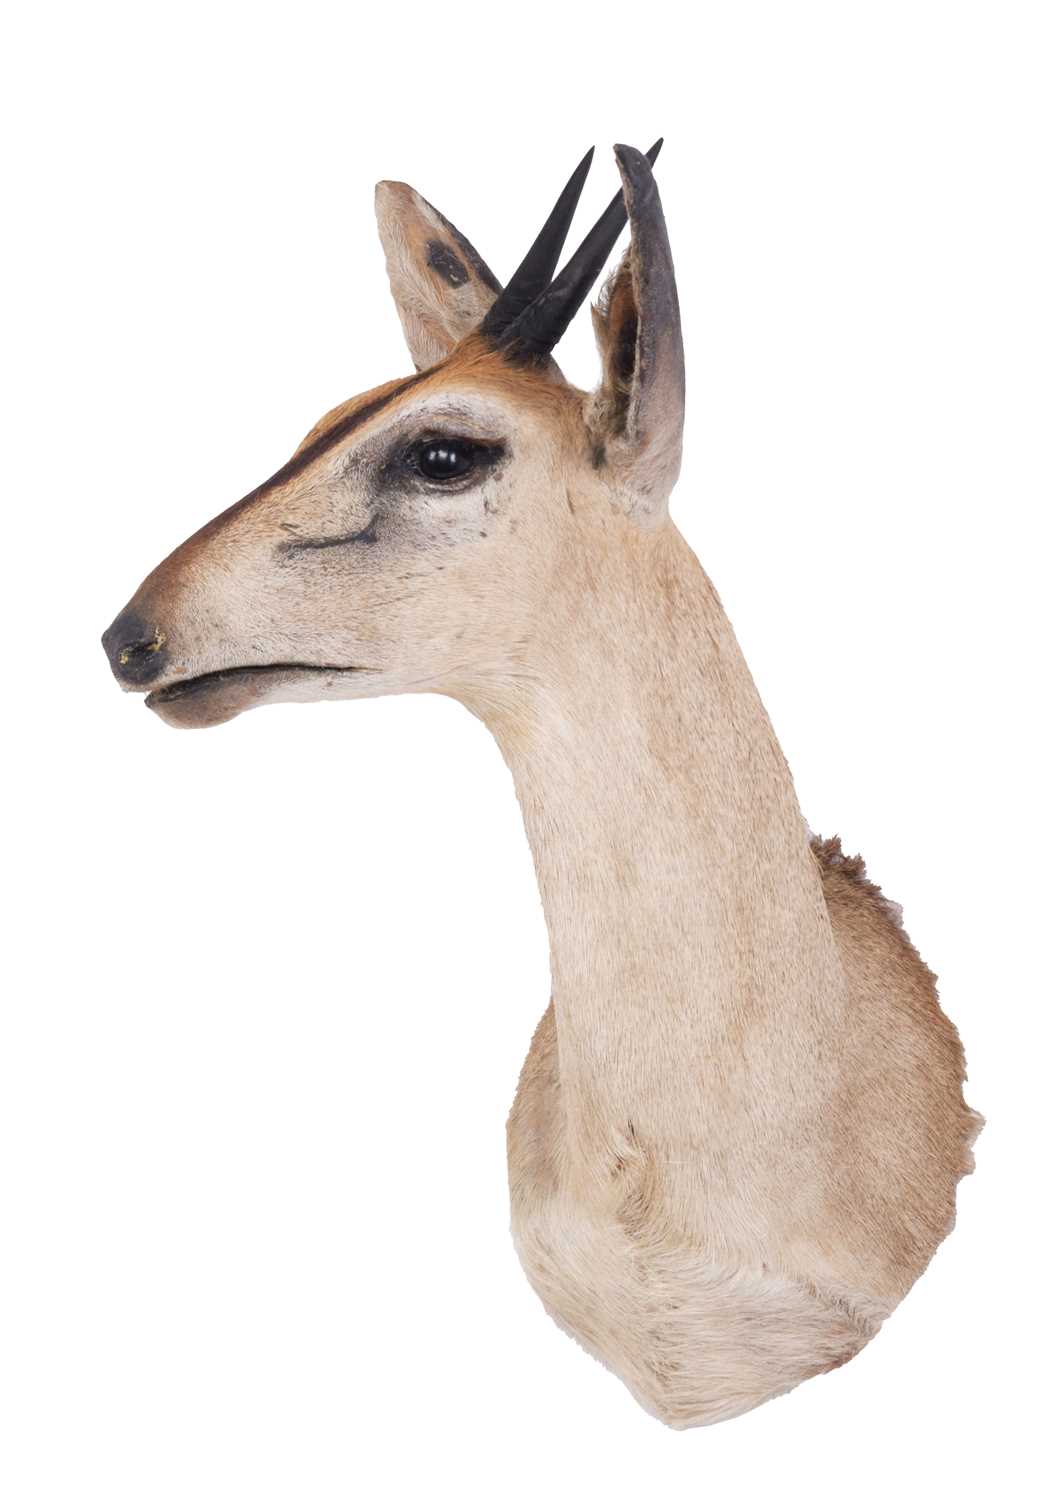 Taxidermy: Common Grey Duiker (Sylvicapra grimmia caffra), modern, South Africa, adult male shoulder - Image 2 of 3